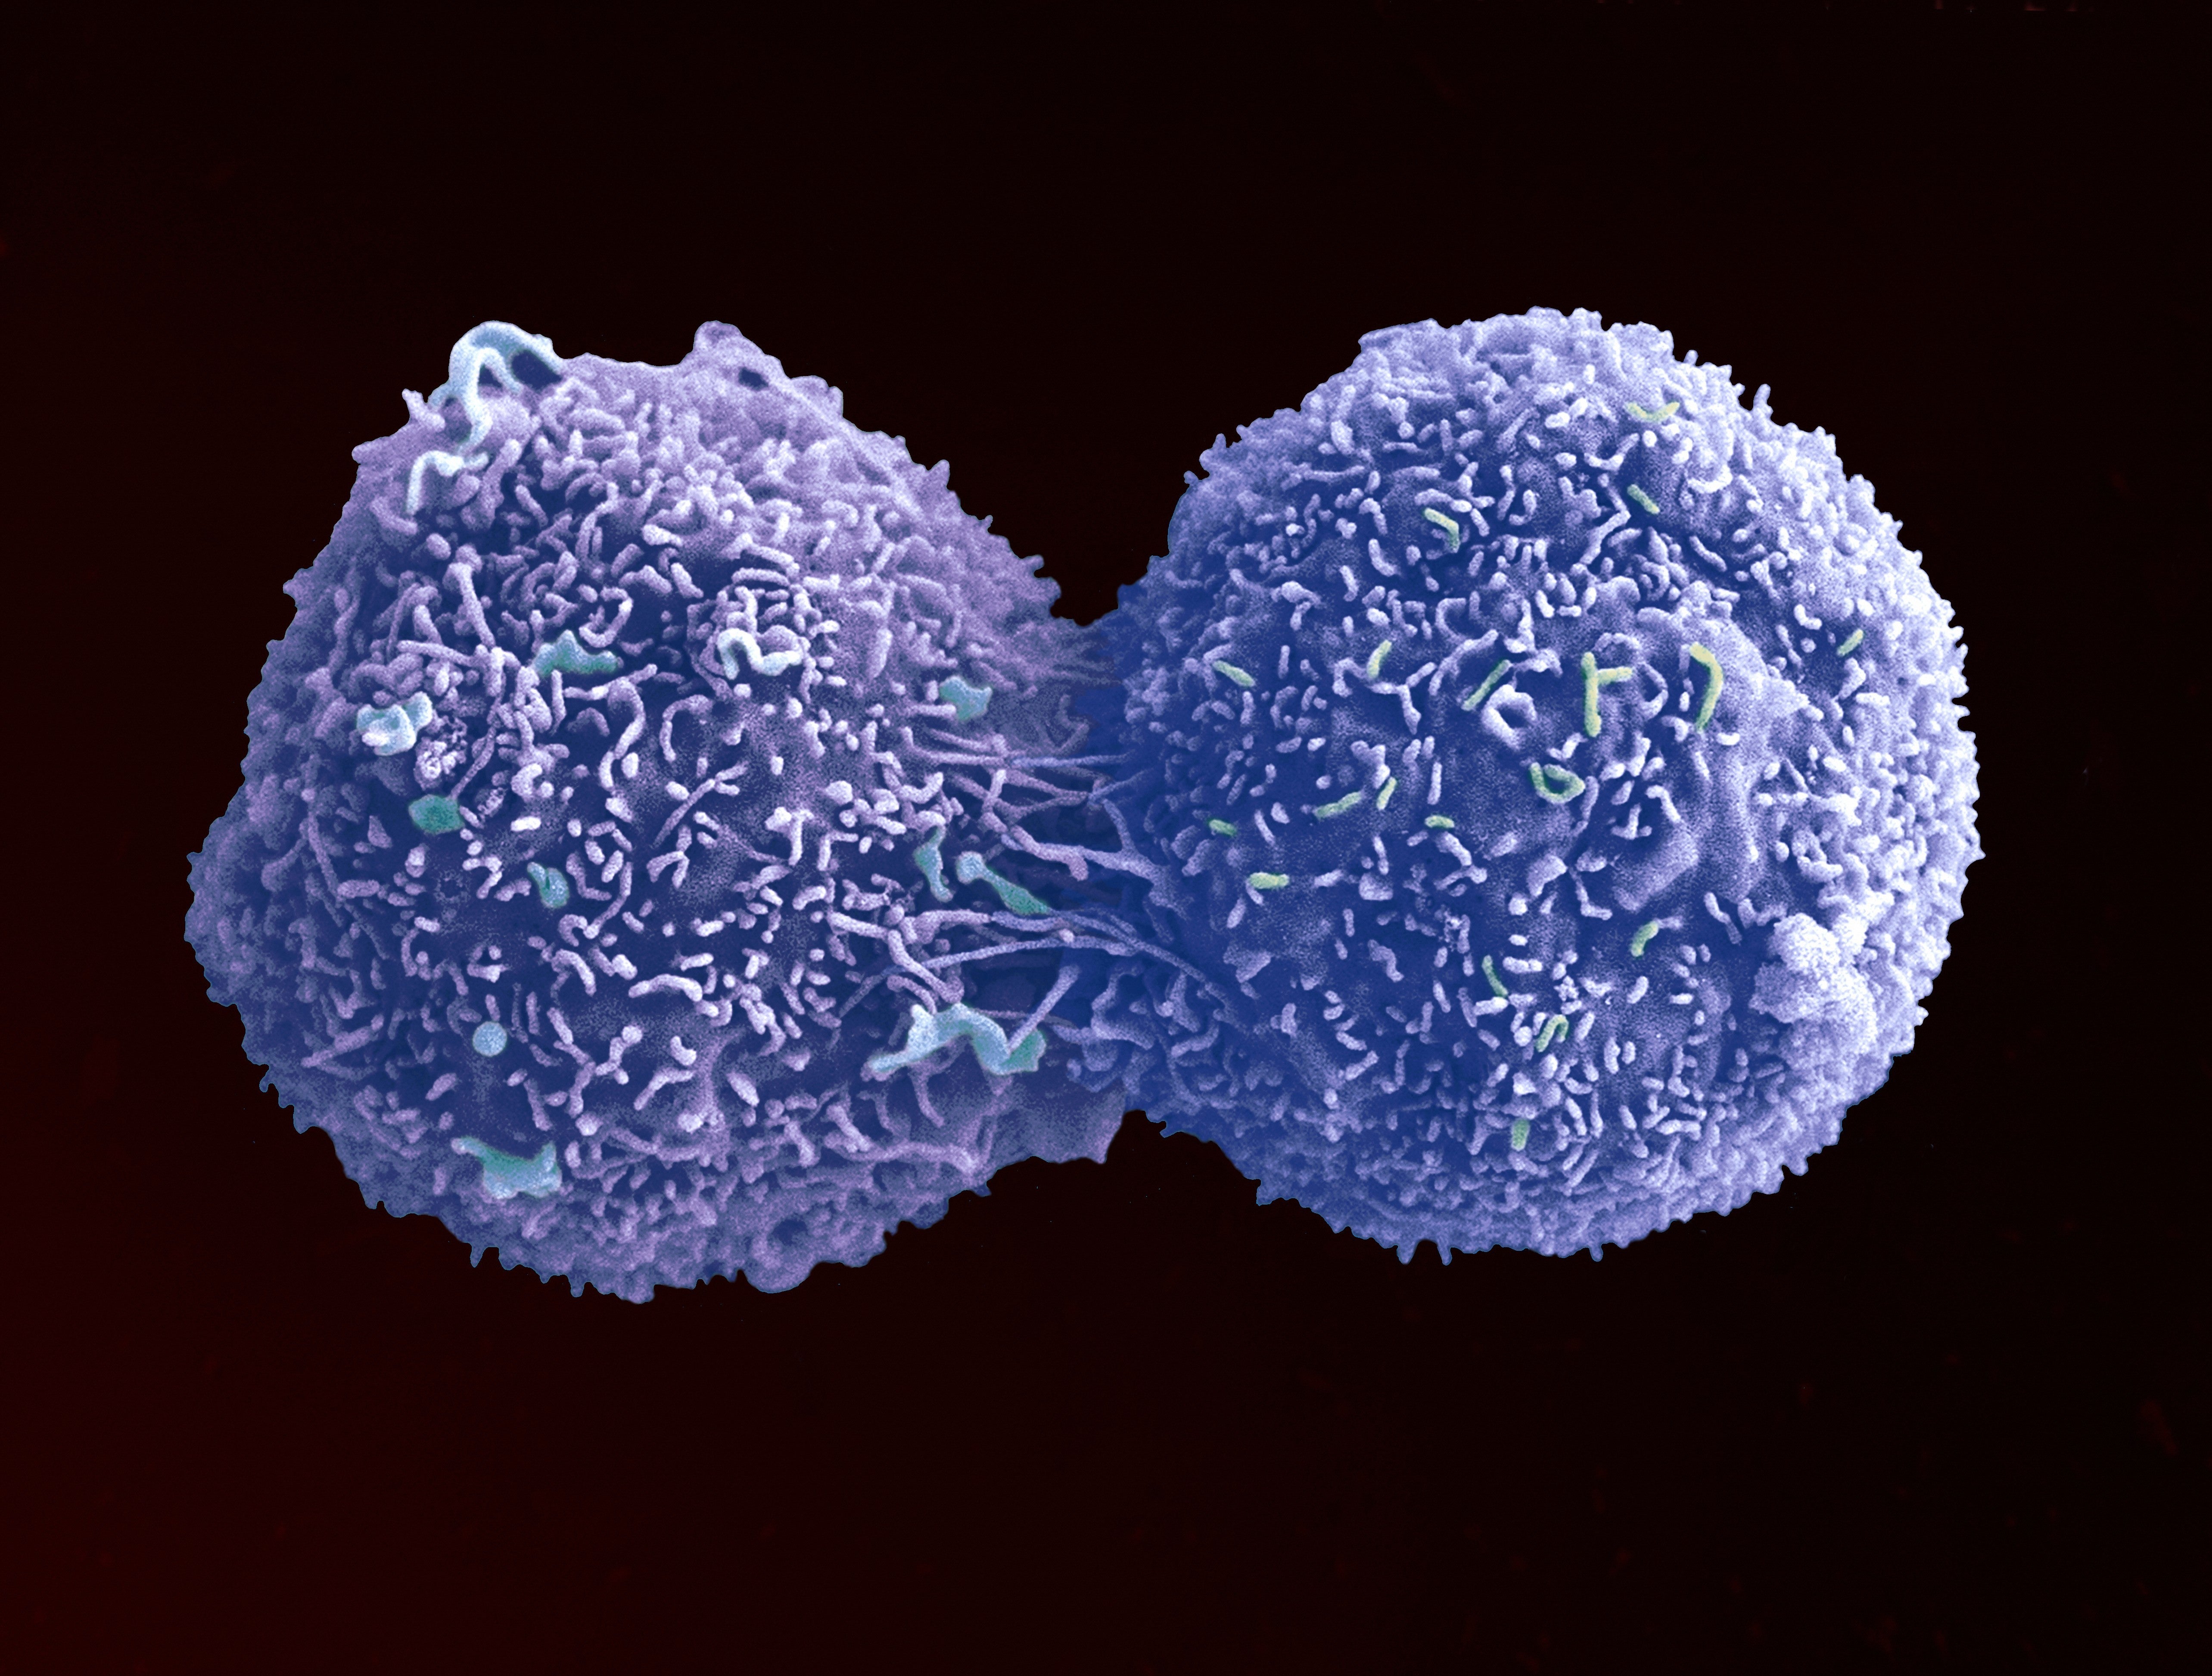 A lung cancer cell dividing, captured by the Wellcome Trust